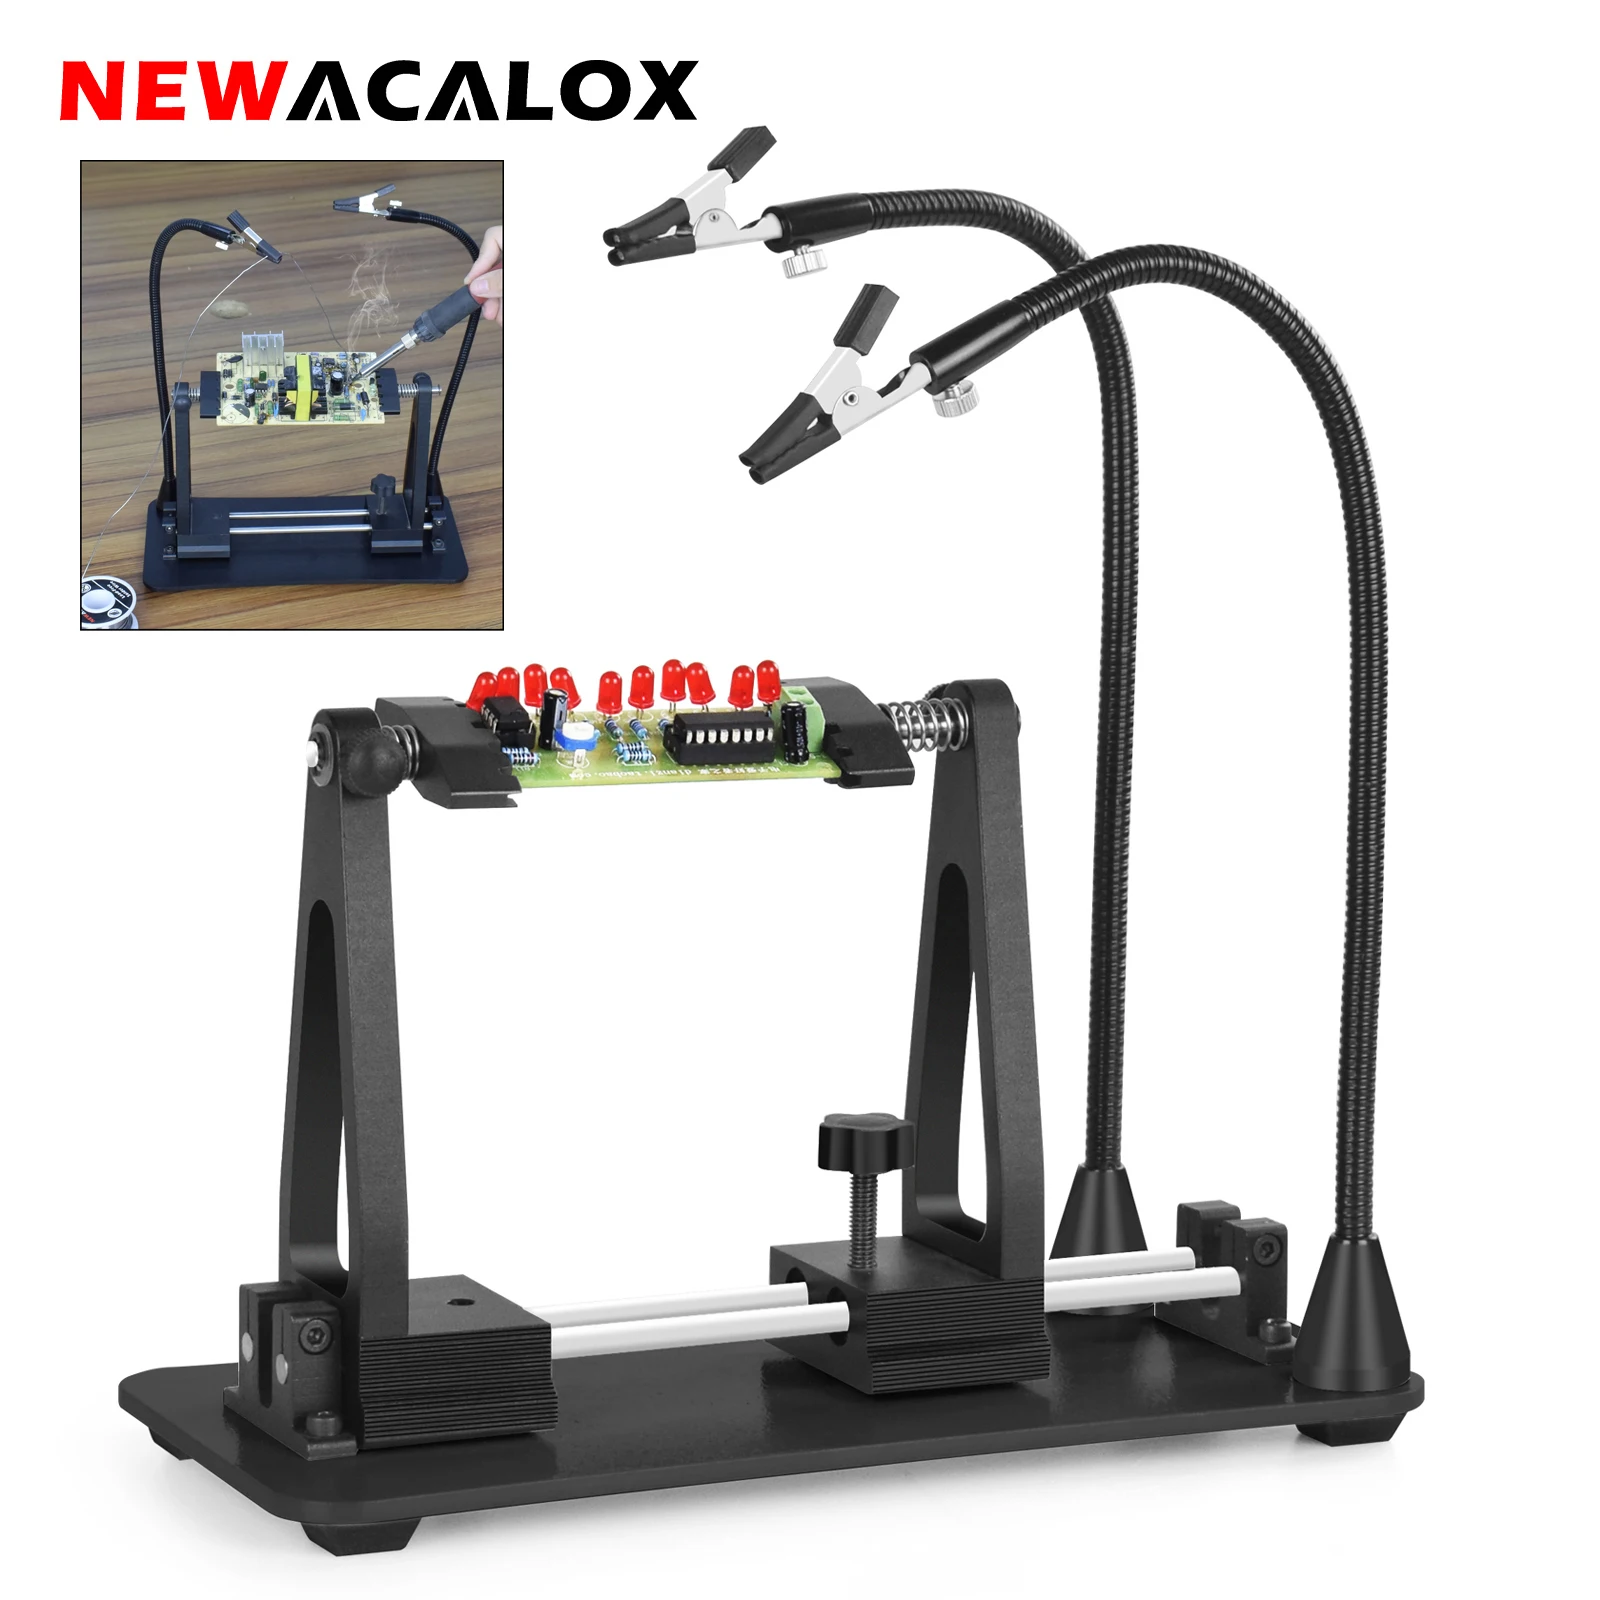 NEWACALOX 360° Adjustable PCB Holder with 2Pcs Magnetic Flexible Soldering Third Hand Welding Repair Helping Hands Station handy third hand tool with 3 flexible gooseneck arms and clips soldering helping hands must have for soldering crafts